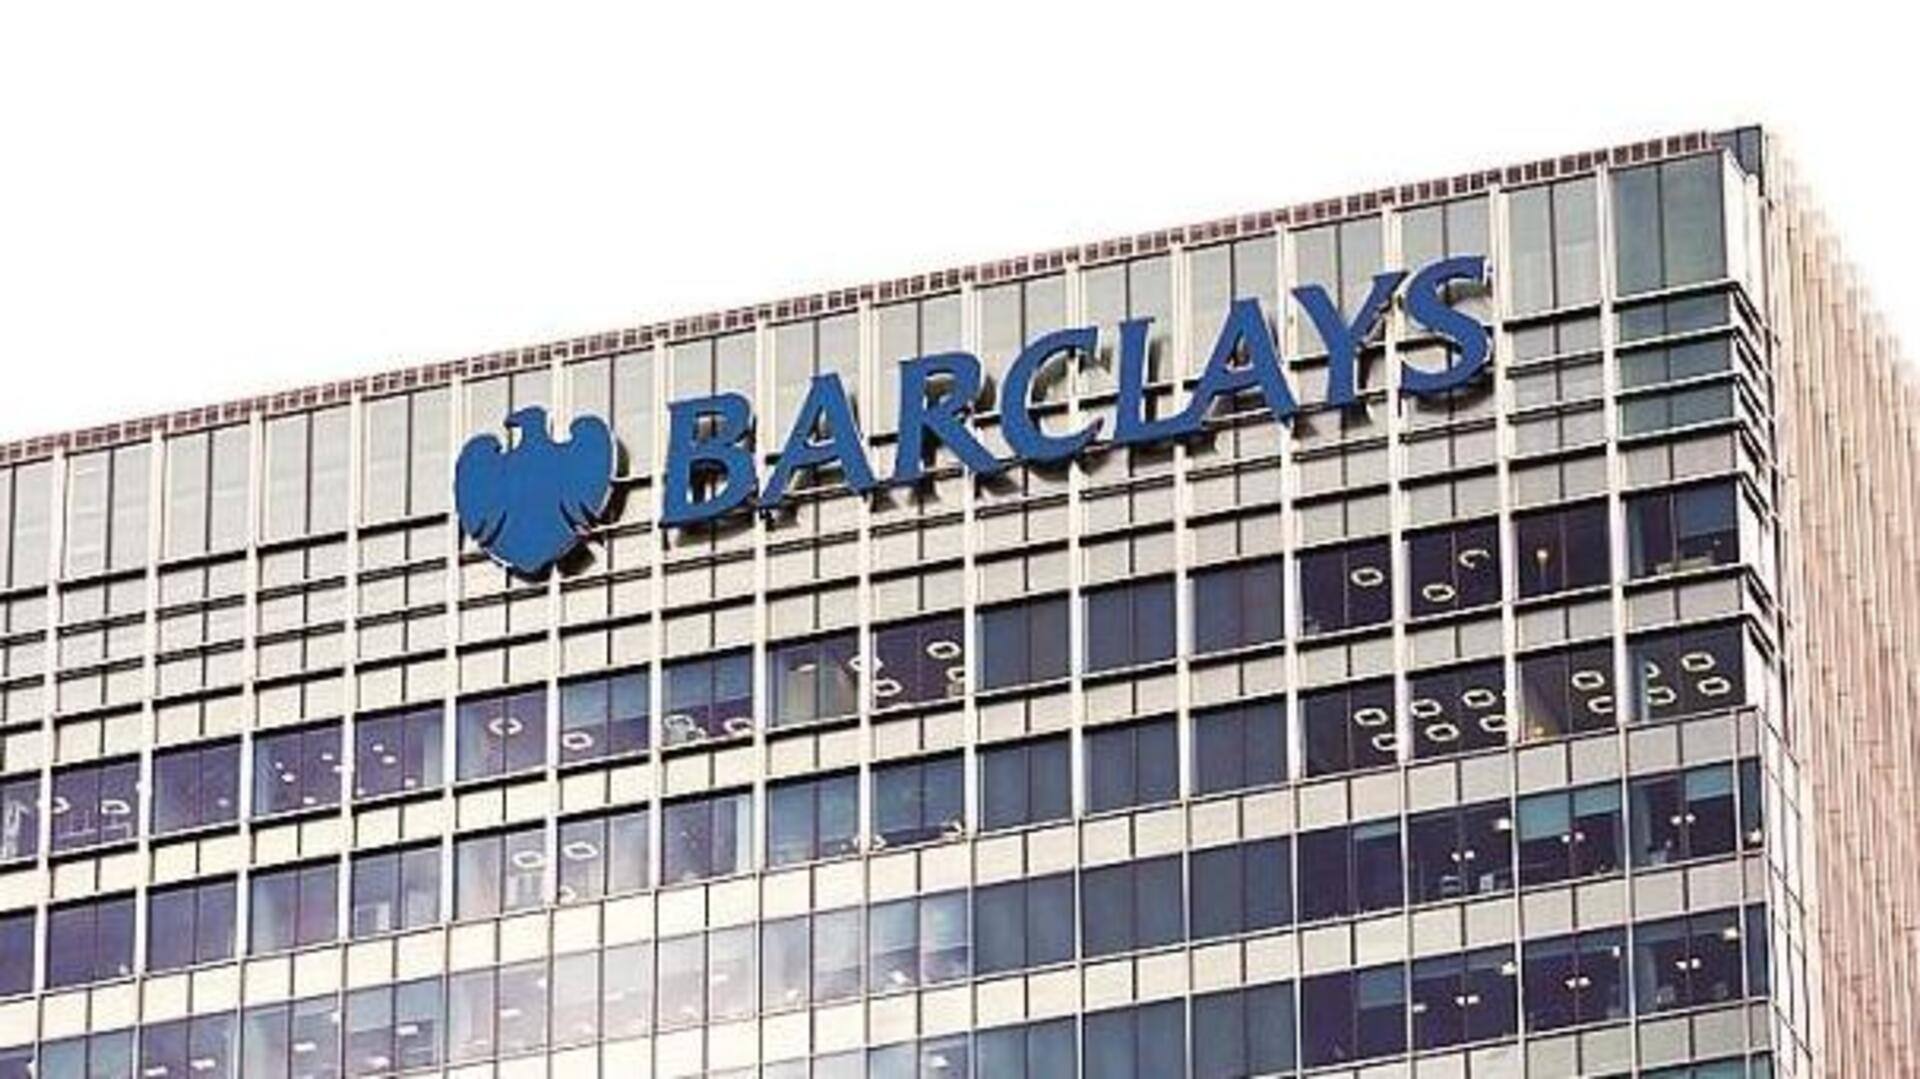 Amid global downsizing, Barclays turns to India for key hires 